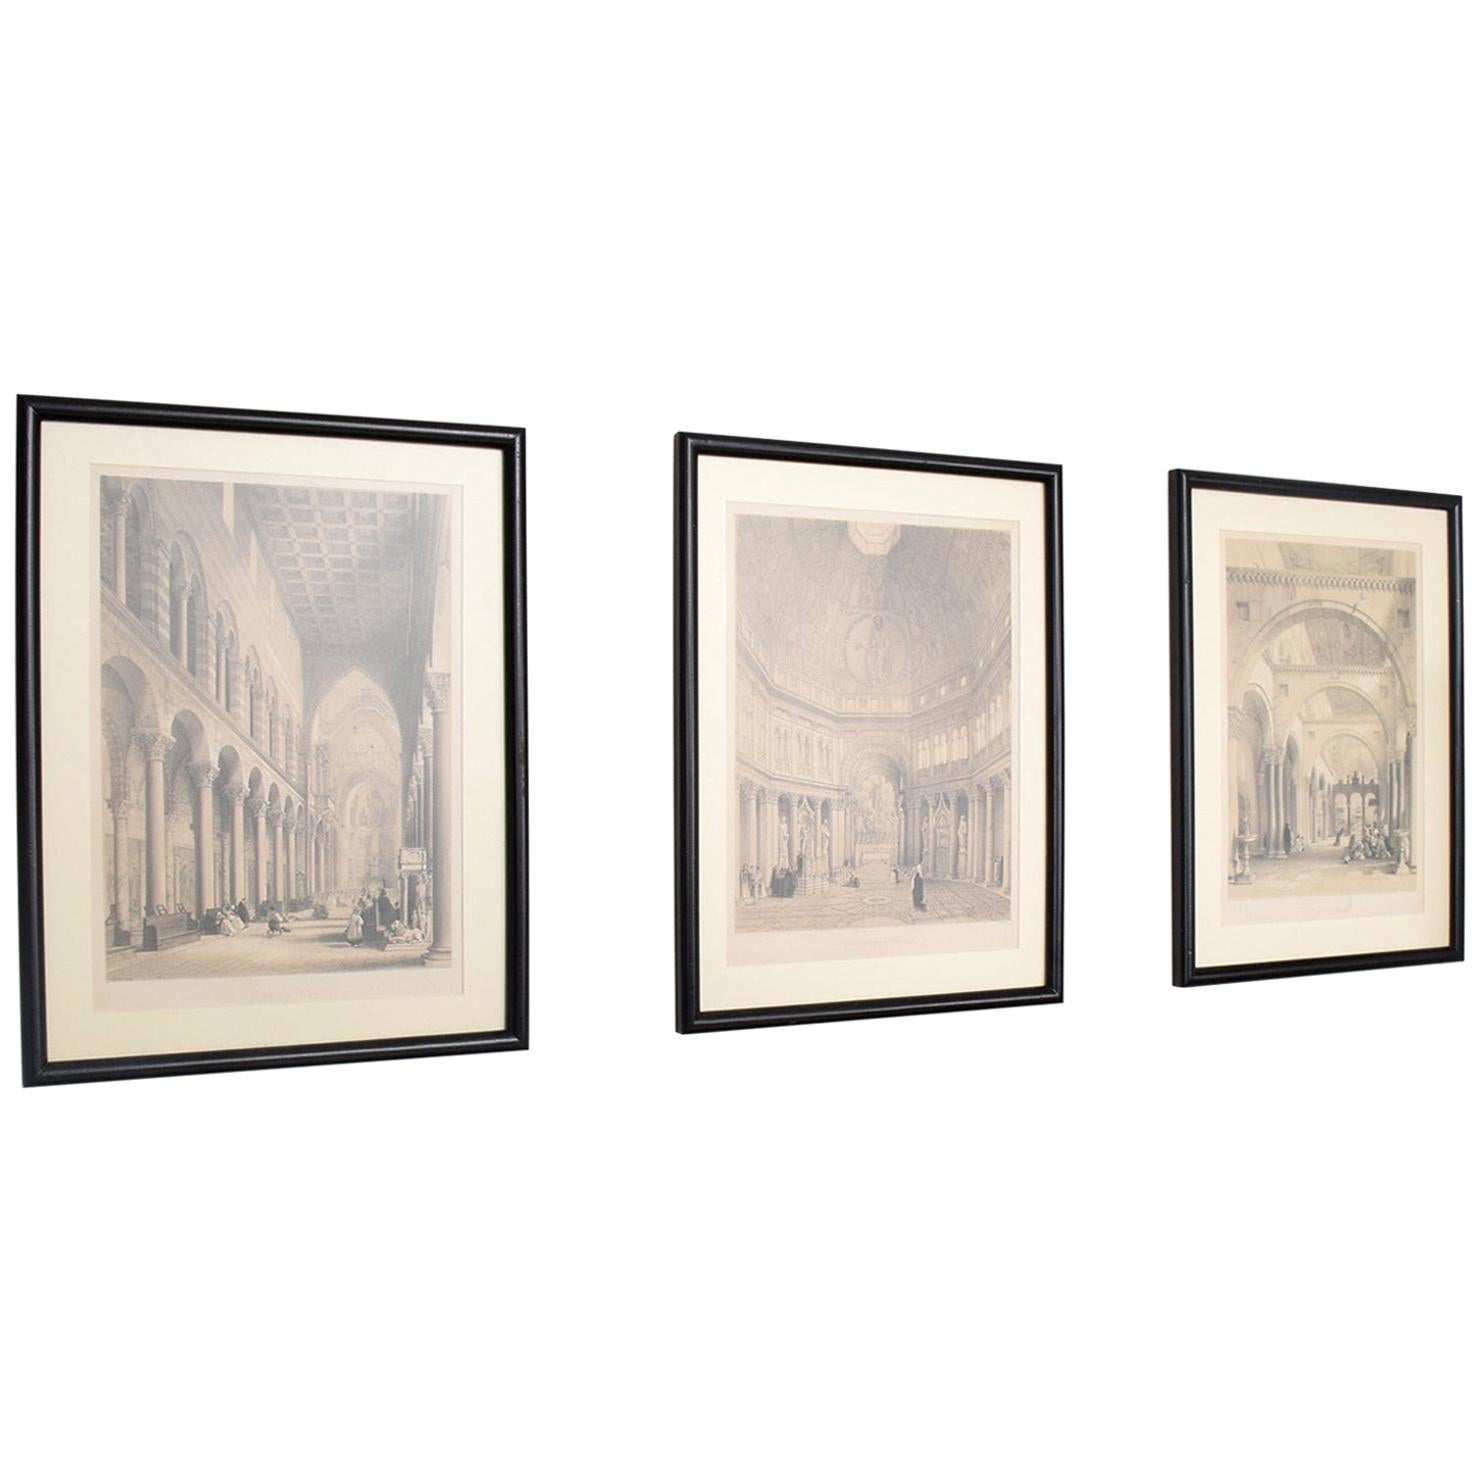 1960s Mid-Century Modern Italian Column Architecture Etchings Framed - Set of 3